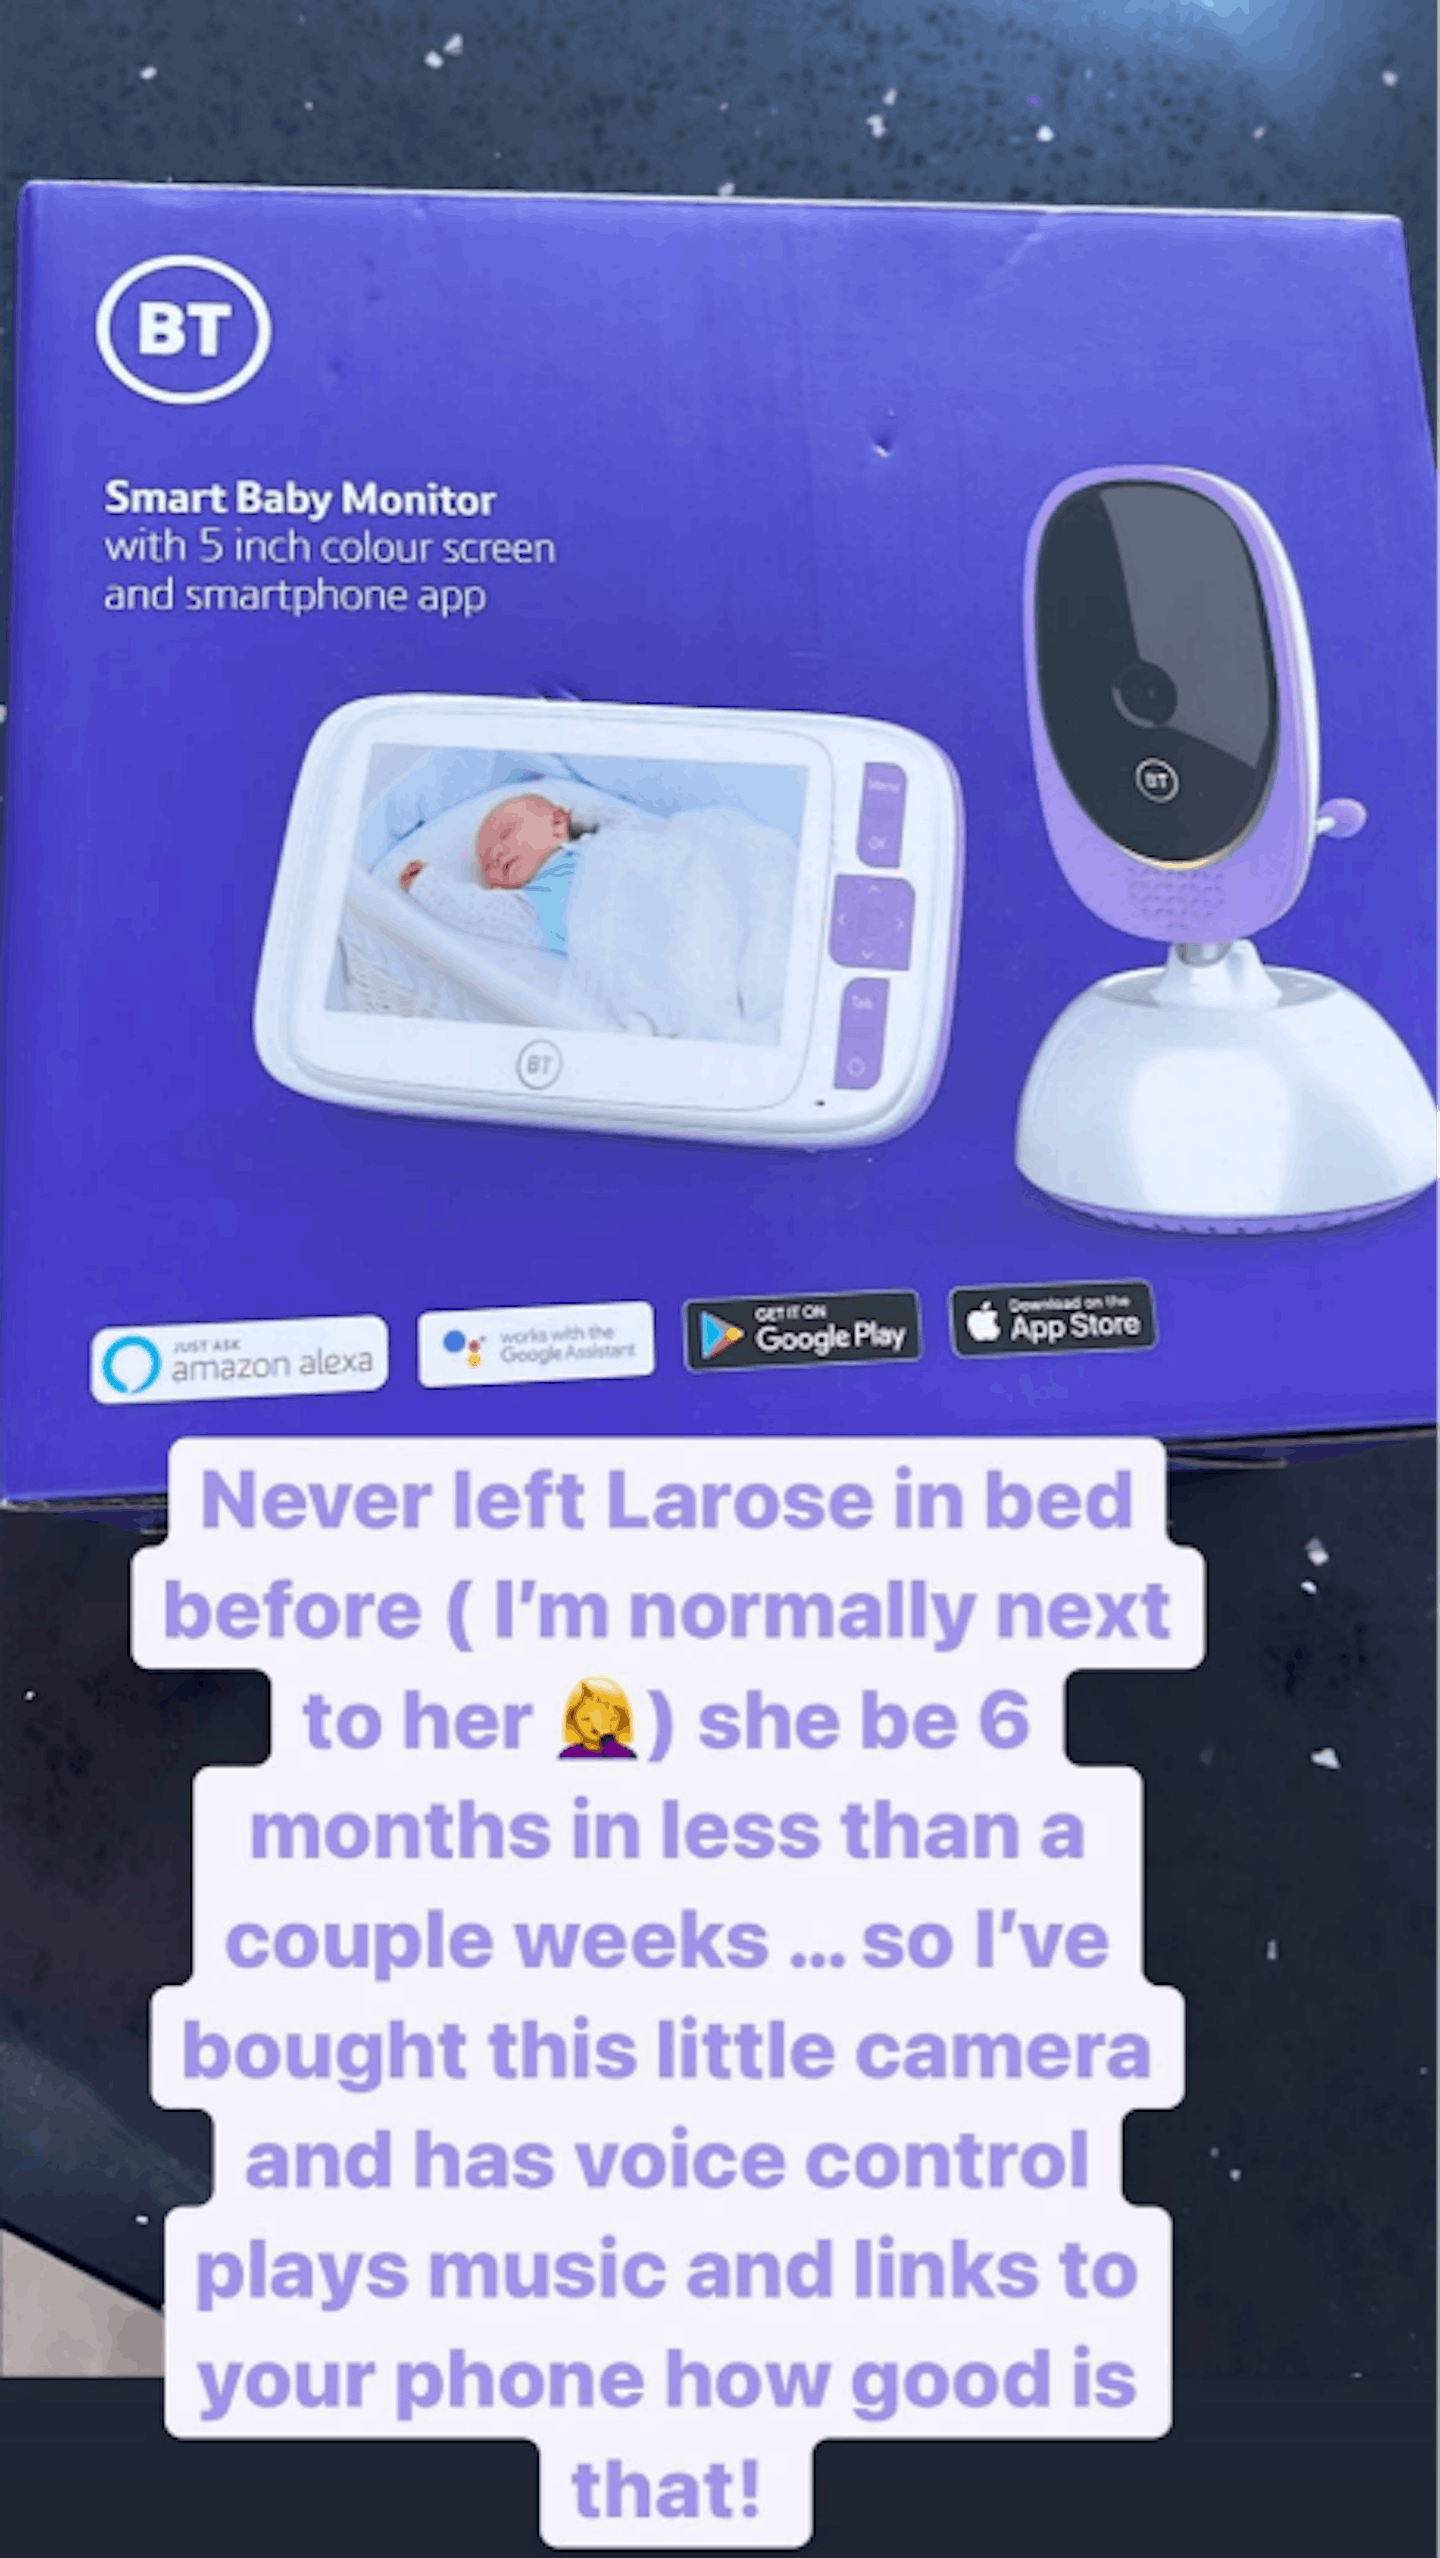 Lauren Goodger's instagram story. She shows a picture of the BT baby monitor with a caption.